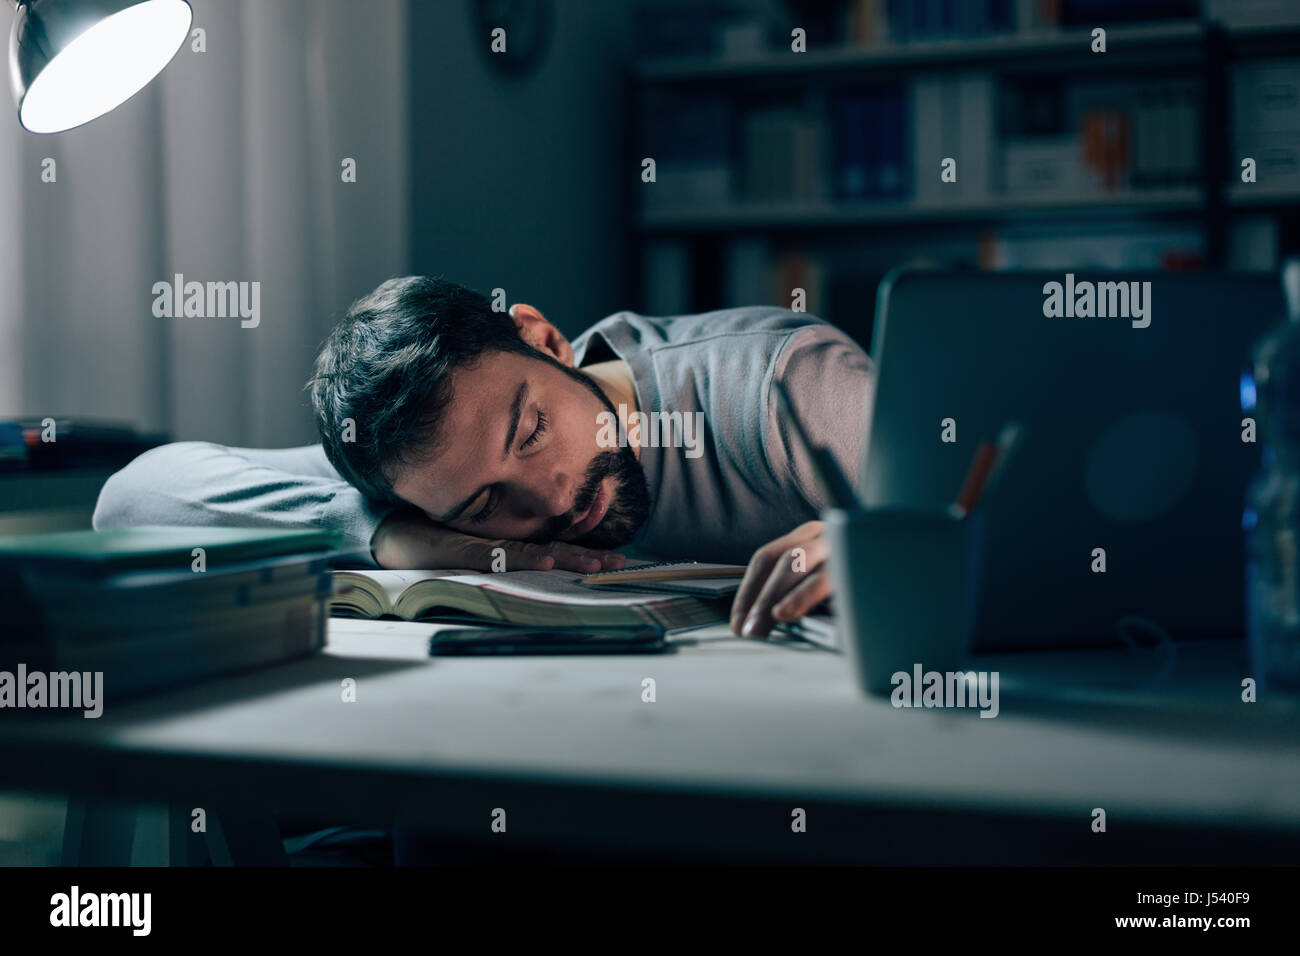 Young exhausted man in the office late at night sleeping on his desk on a book, restlessness and overwork concept Stock Photo